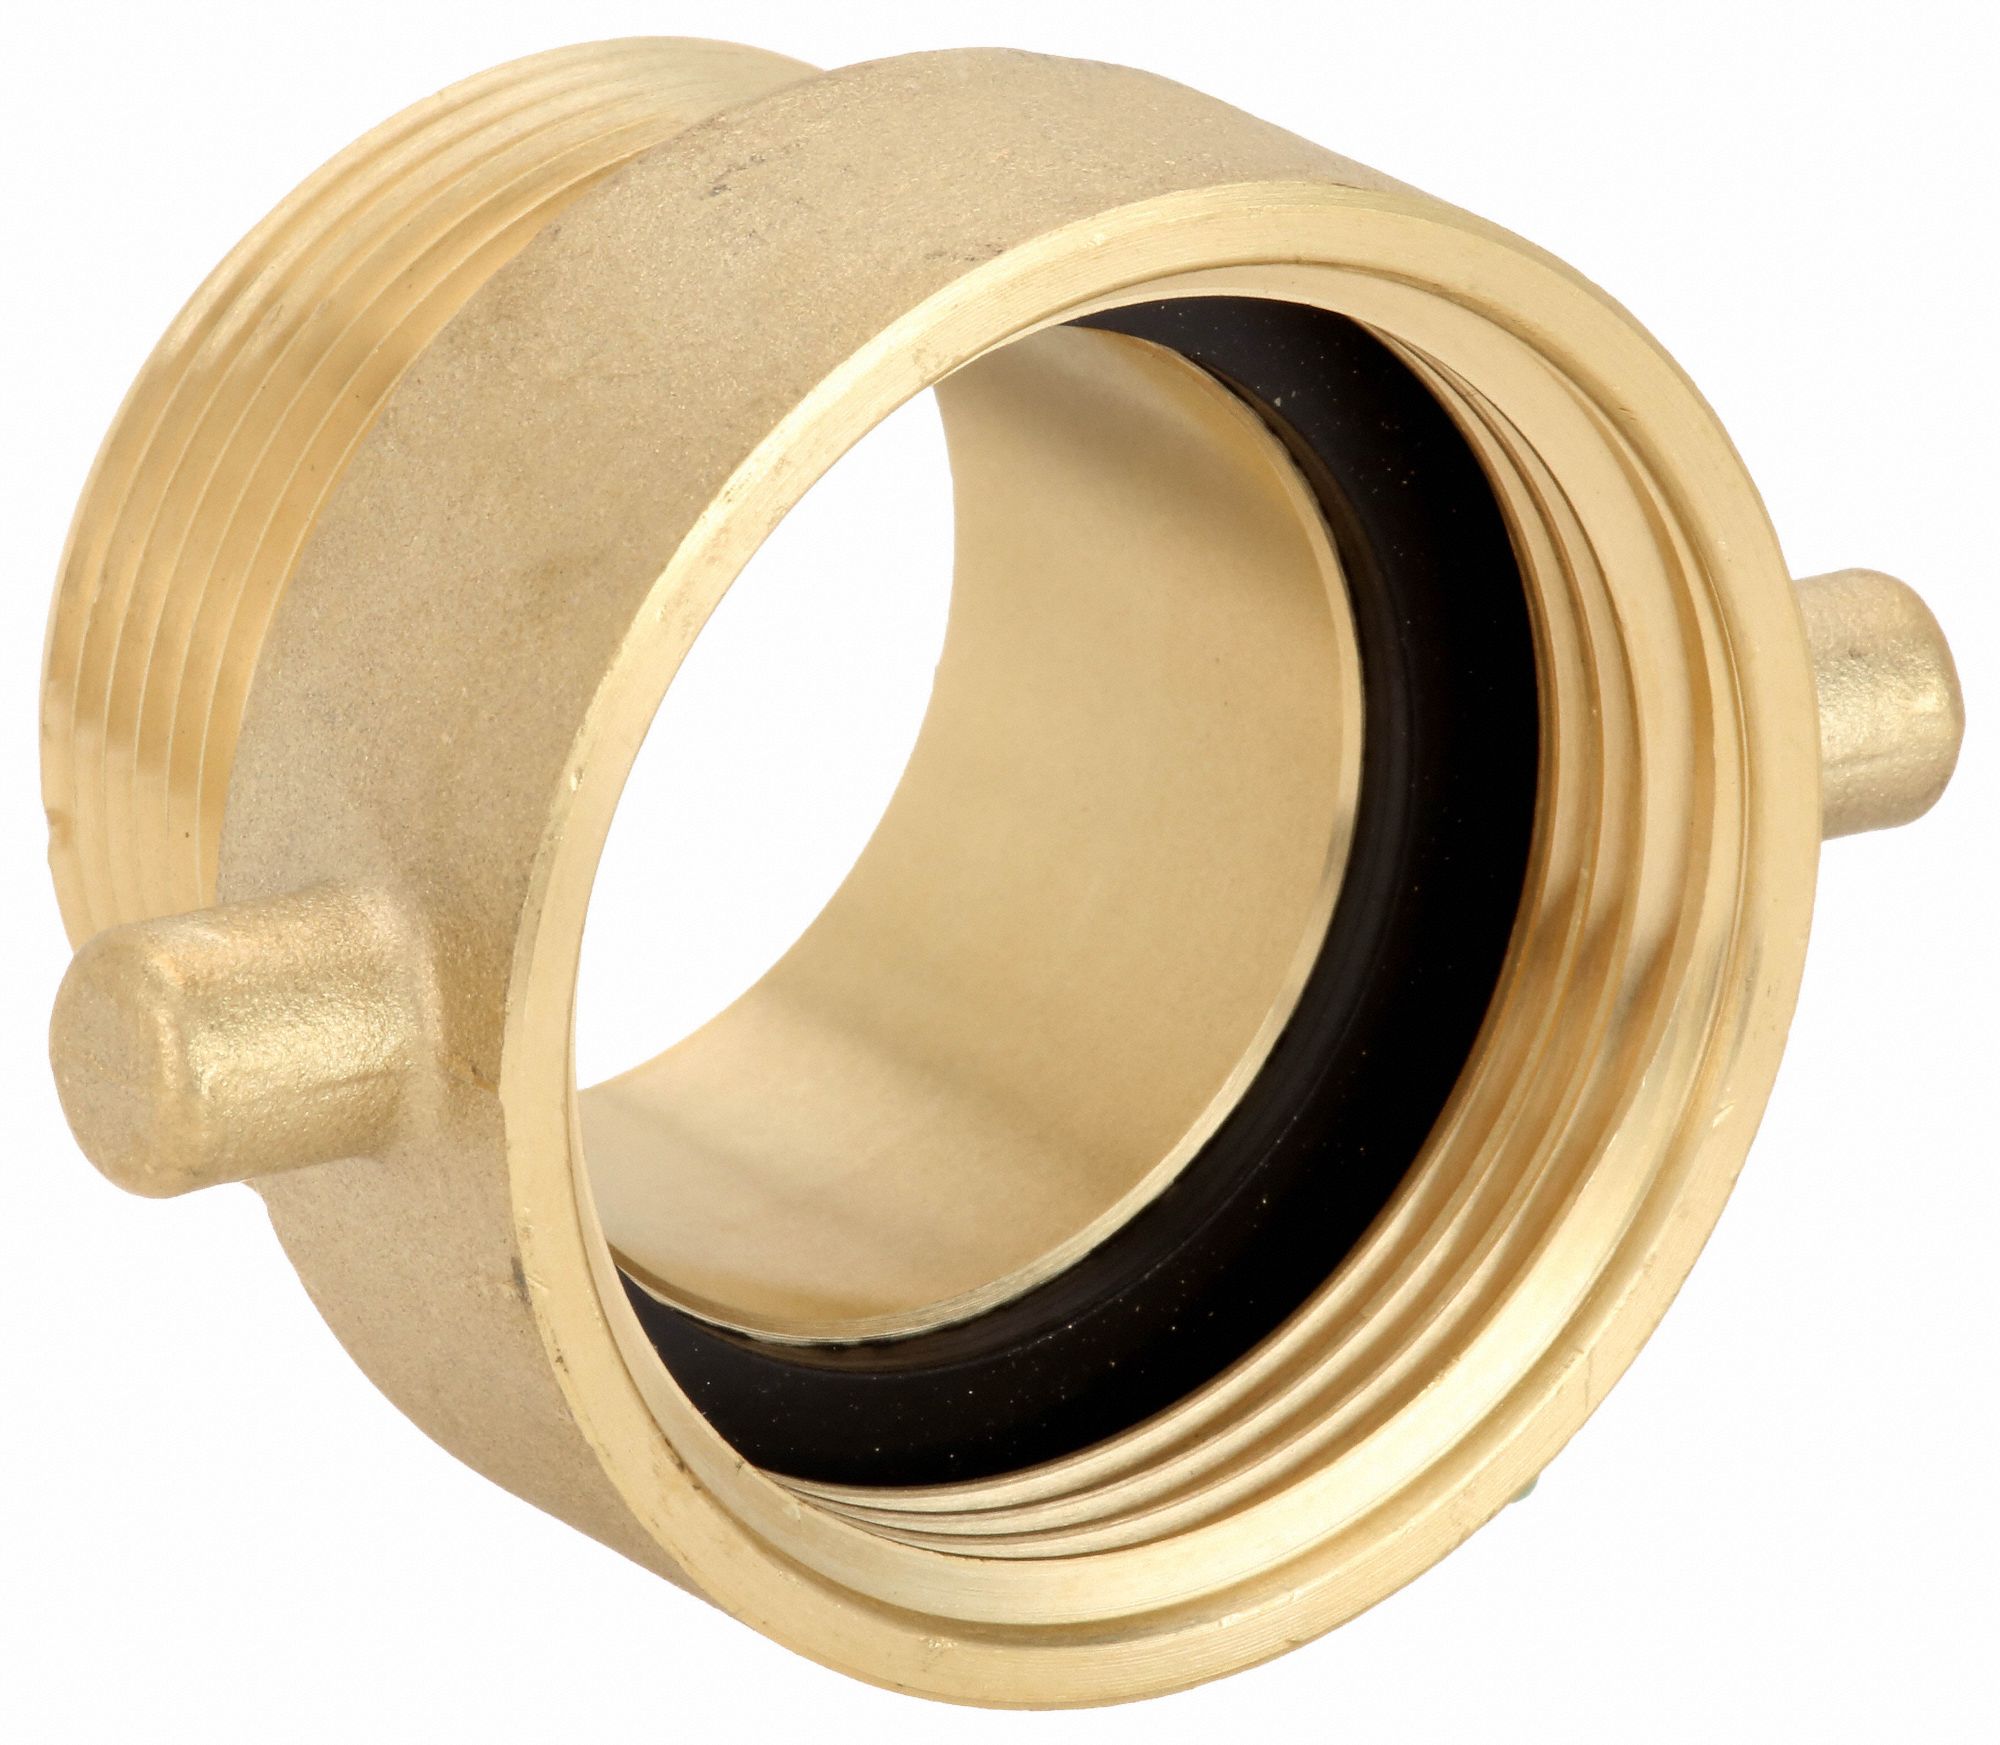 HEX BRASS FIRE HOSE ADAPTER 1-1/2" FNST X 1-1/2" FIPT Double Female  #FFH1515F 